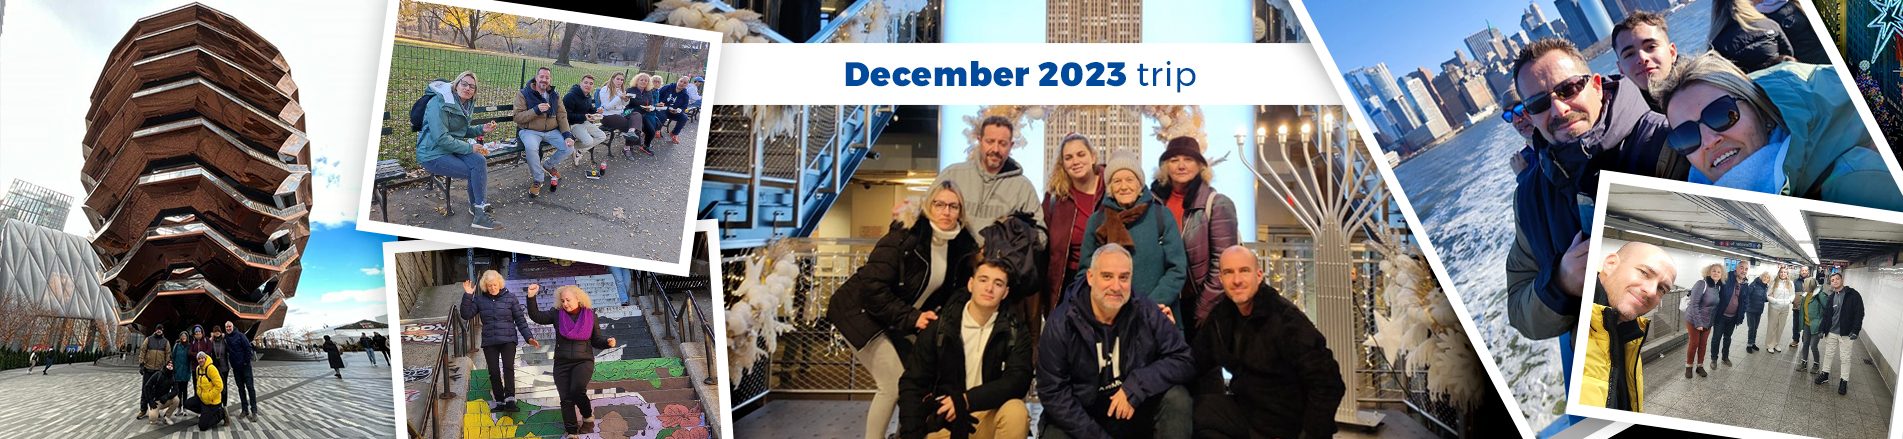 Travel to New York in December 2023 with Flight, Hotel & Guide